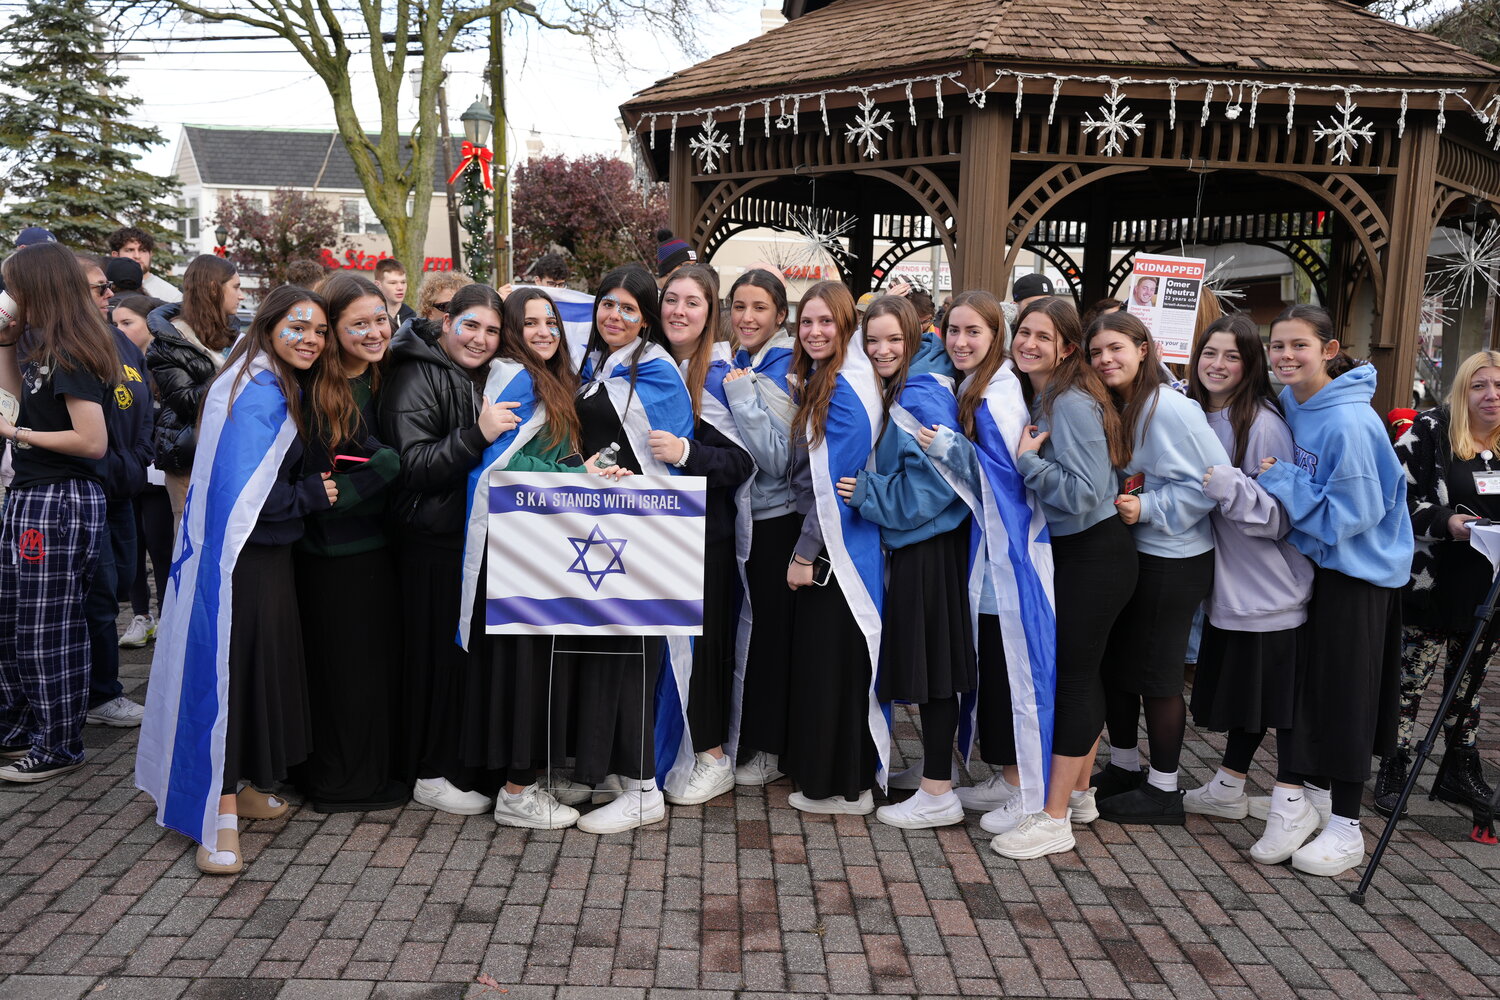 Students from the Stella K. Abraham High School for Girls, a modern Orthodox Jewish day school in Hewlett, proudly represented their institution in the crowd.